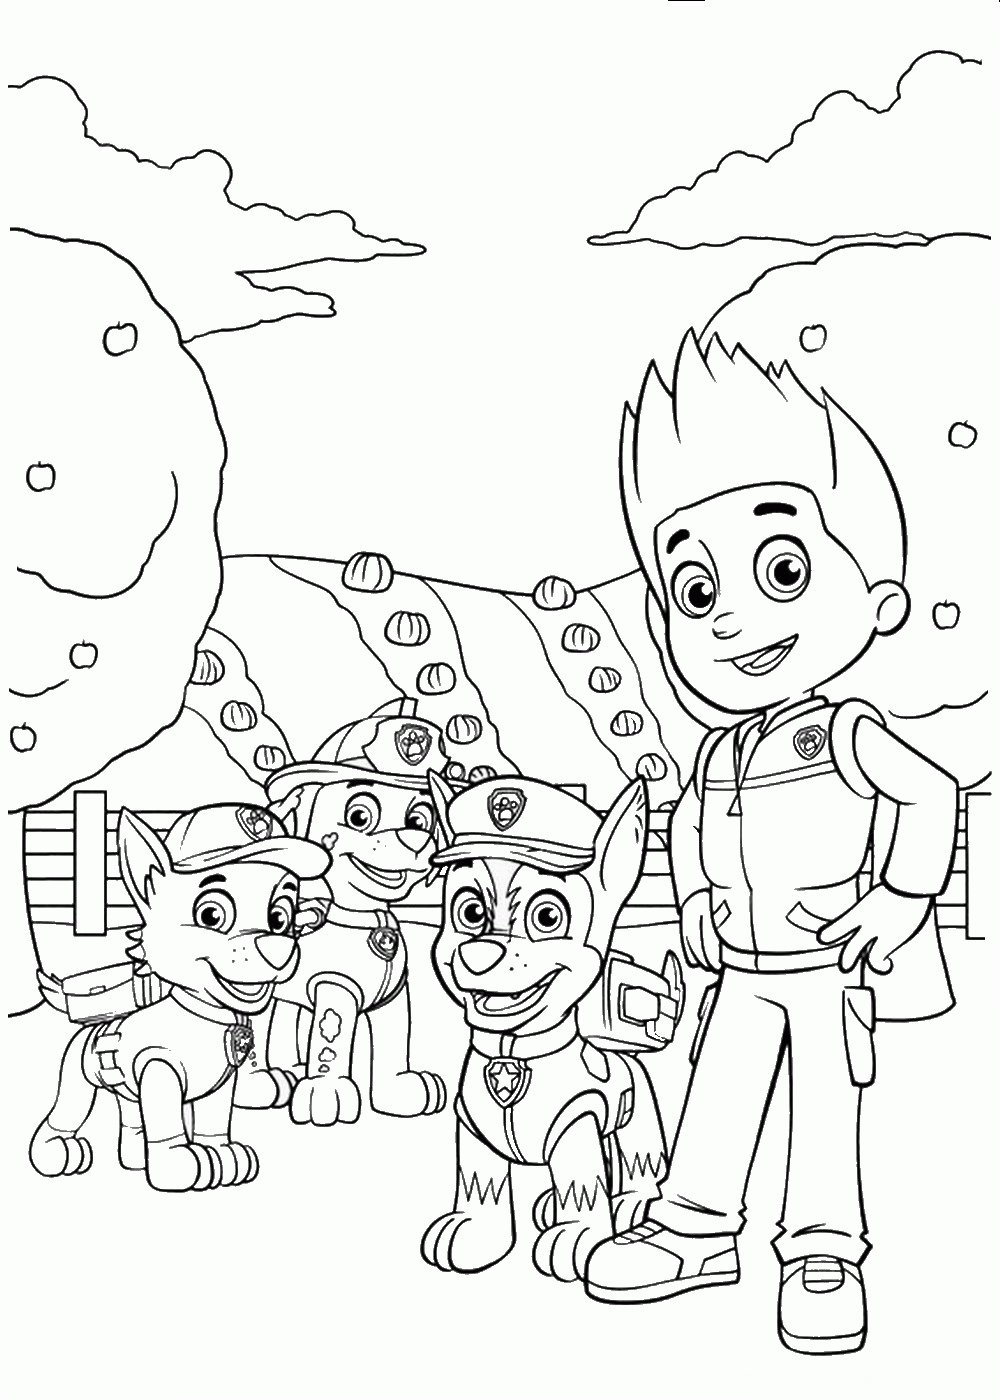 11 Pics of Rubble PAW Patrol Coloring Pages - PAW Patrol Coloring ...